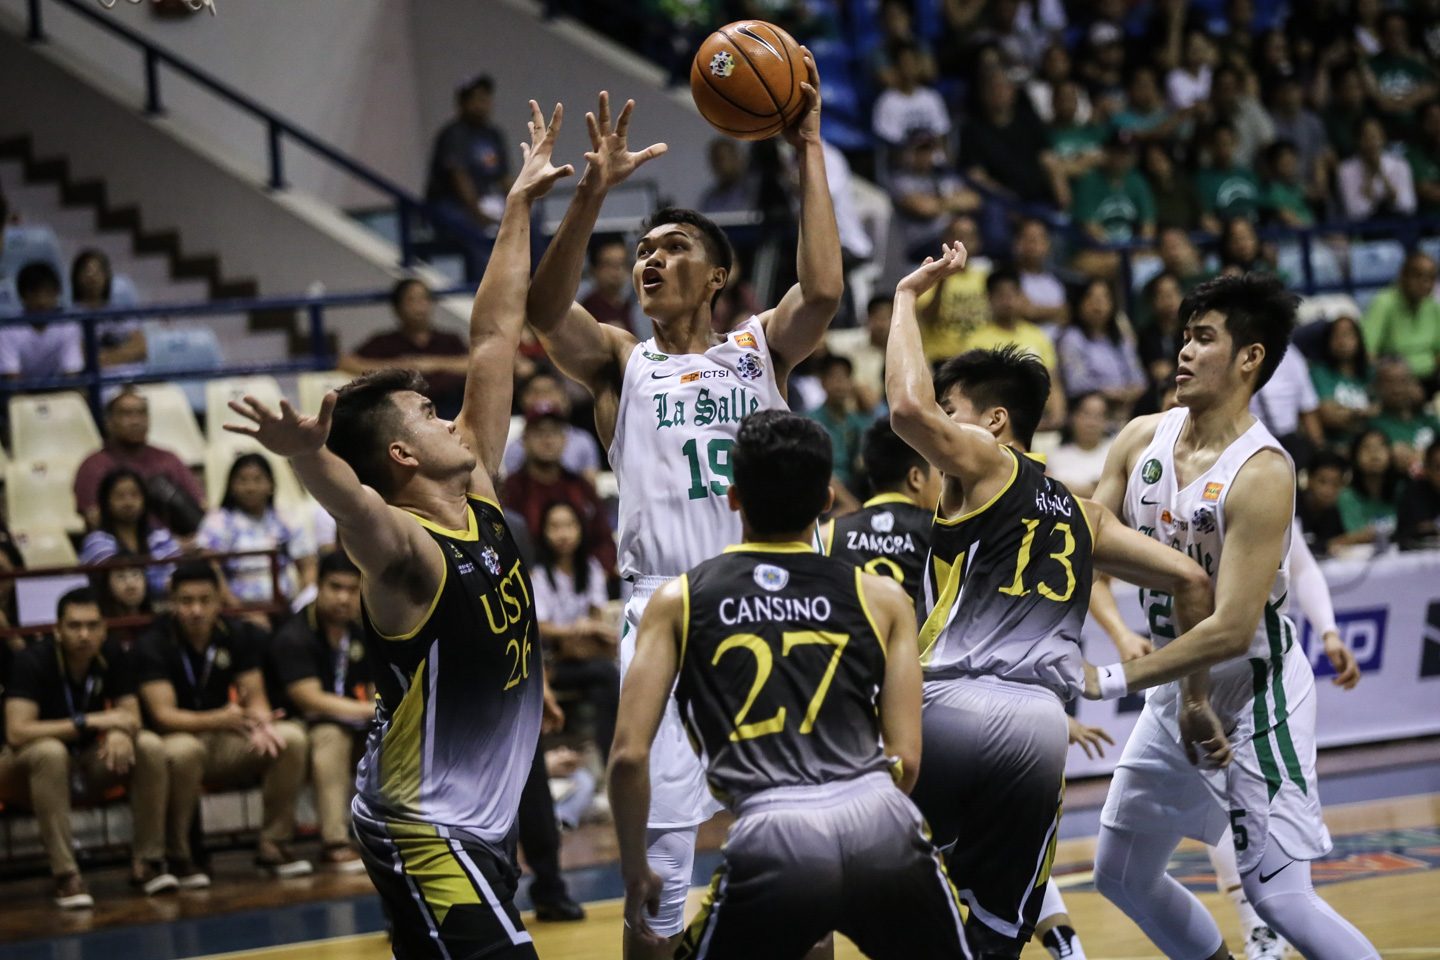 La Salle shreds UST by 41 points